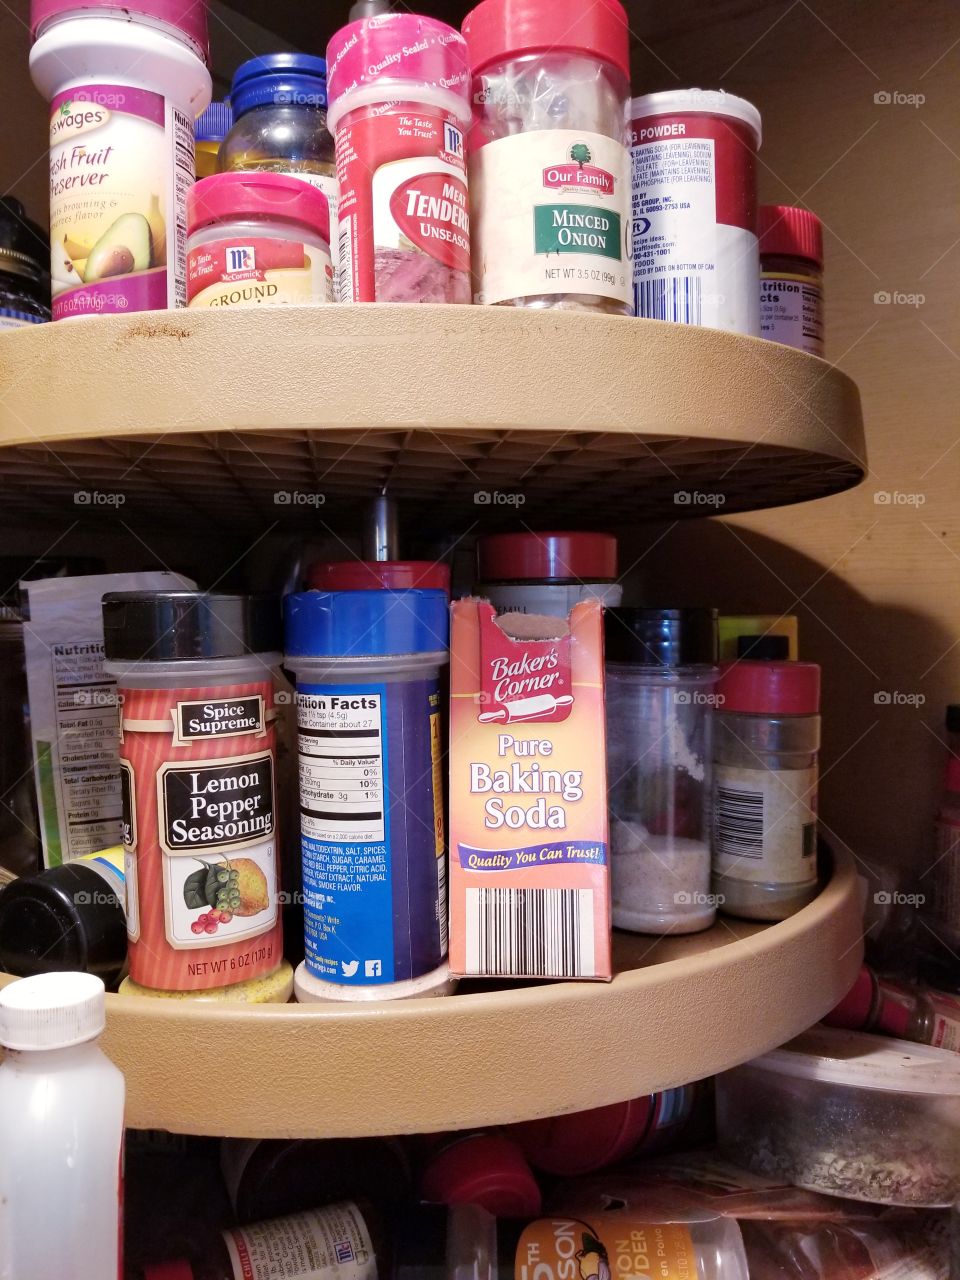 The spice cabinet.